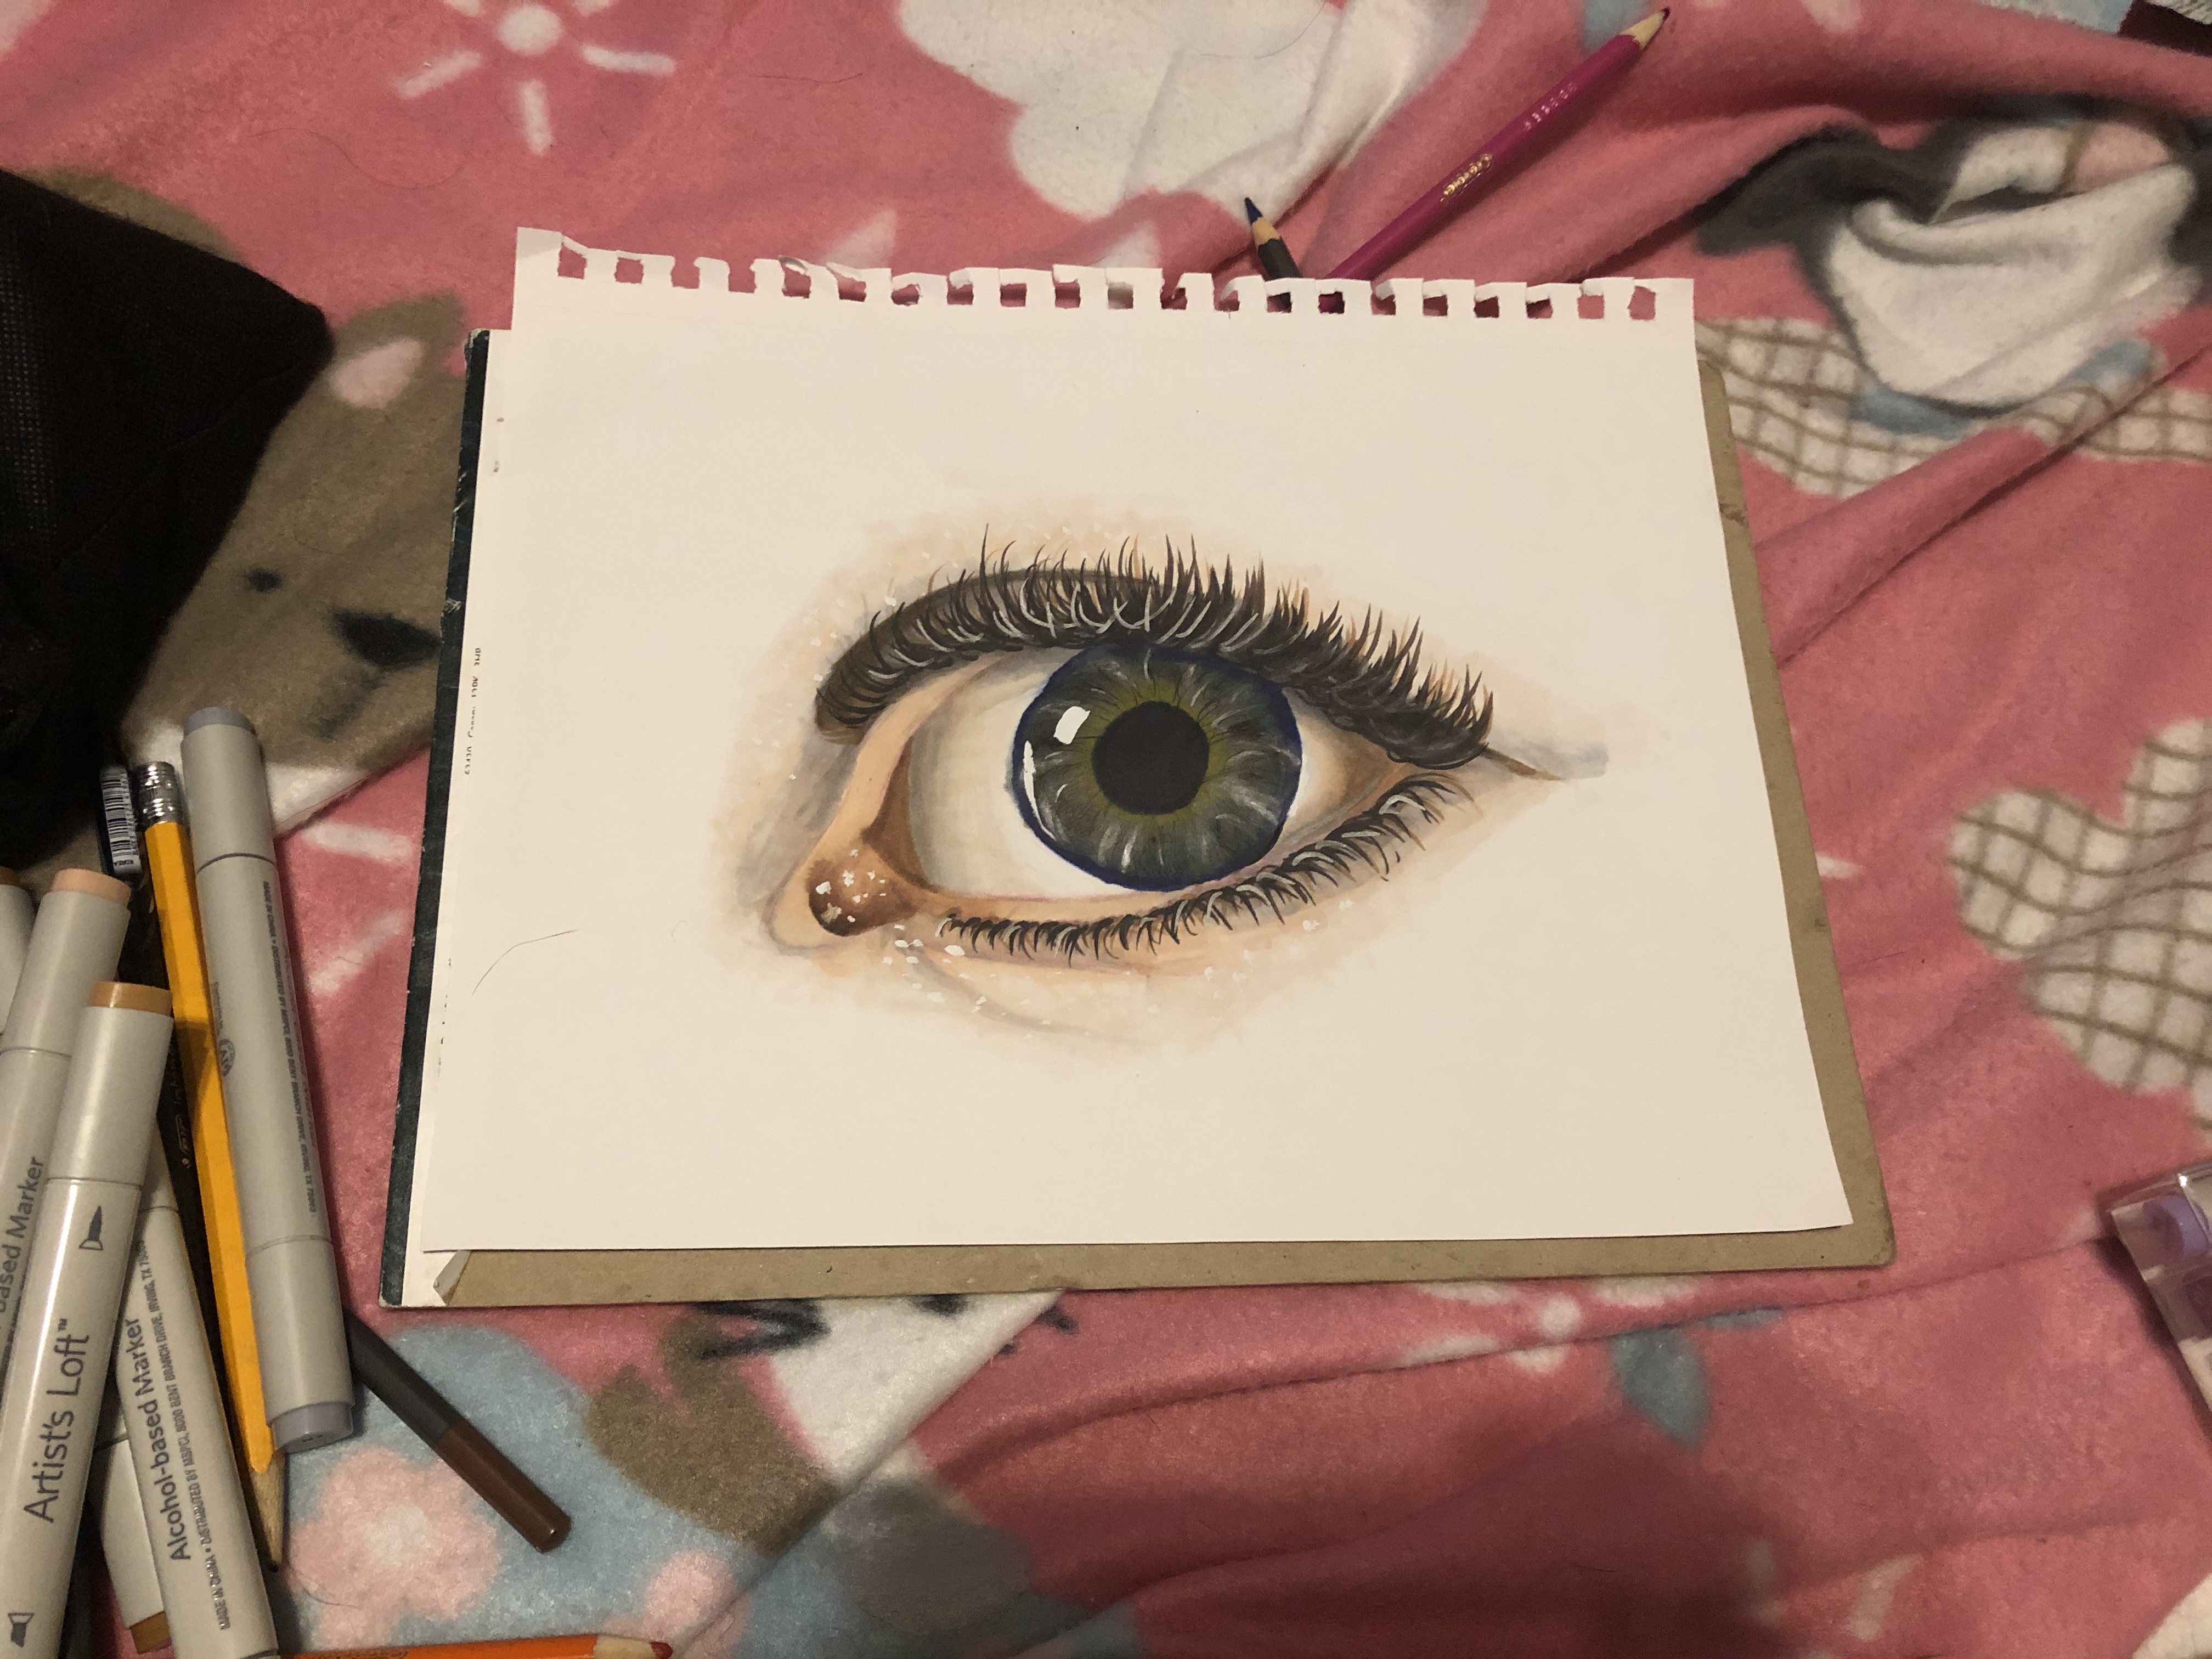 Coloring a Realistic Eye [VIDEO]